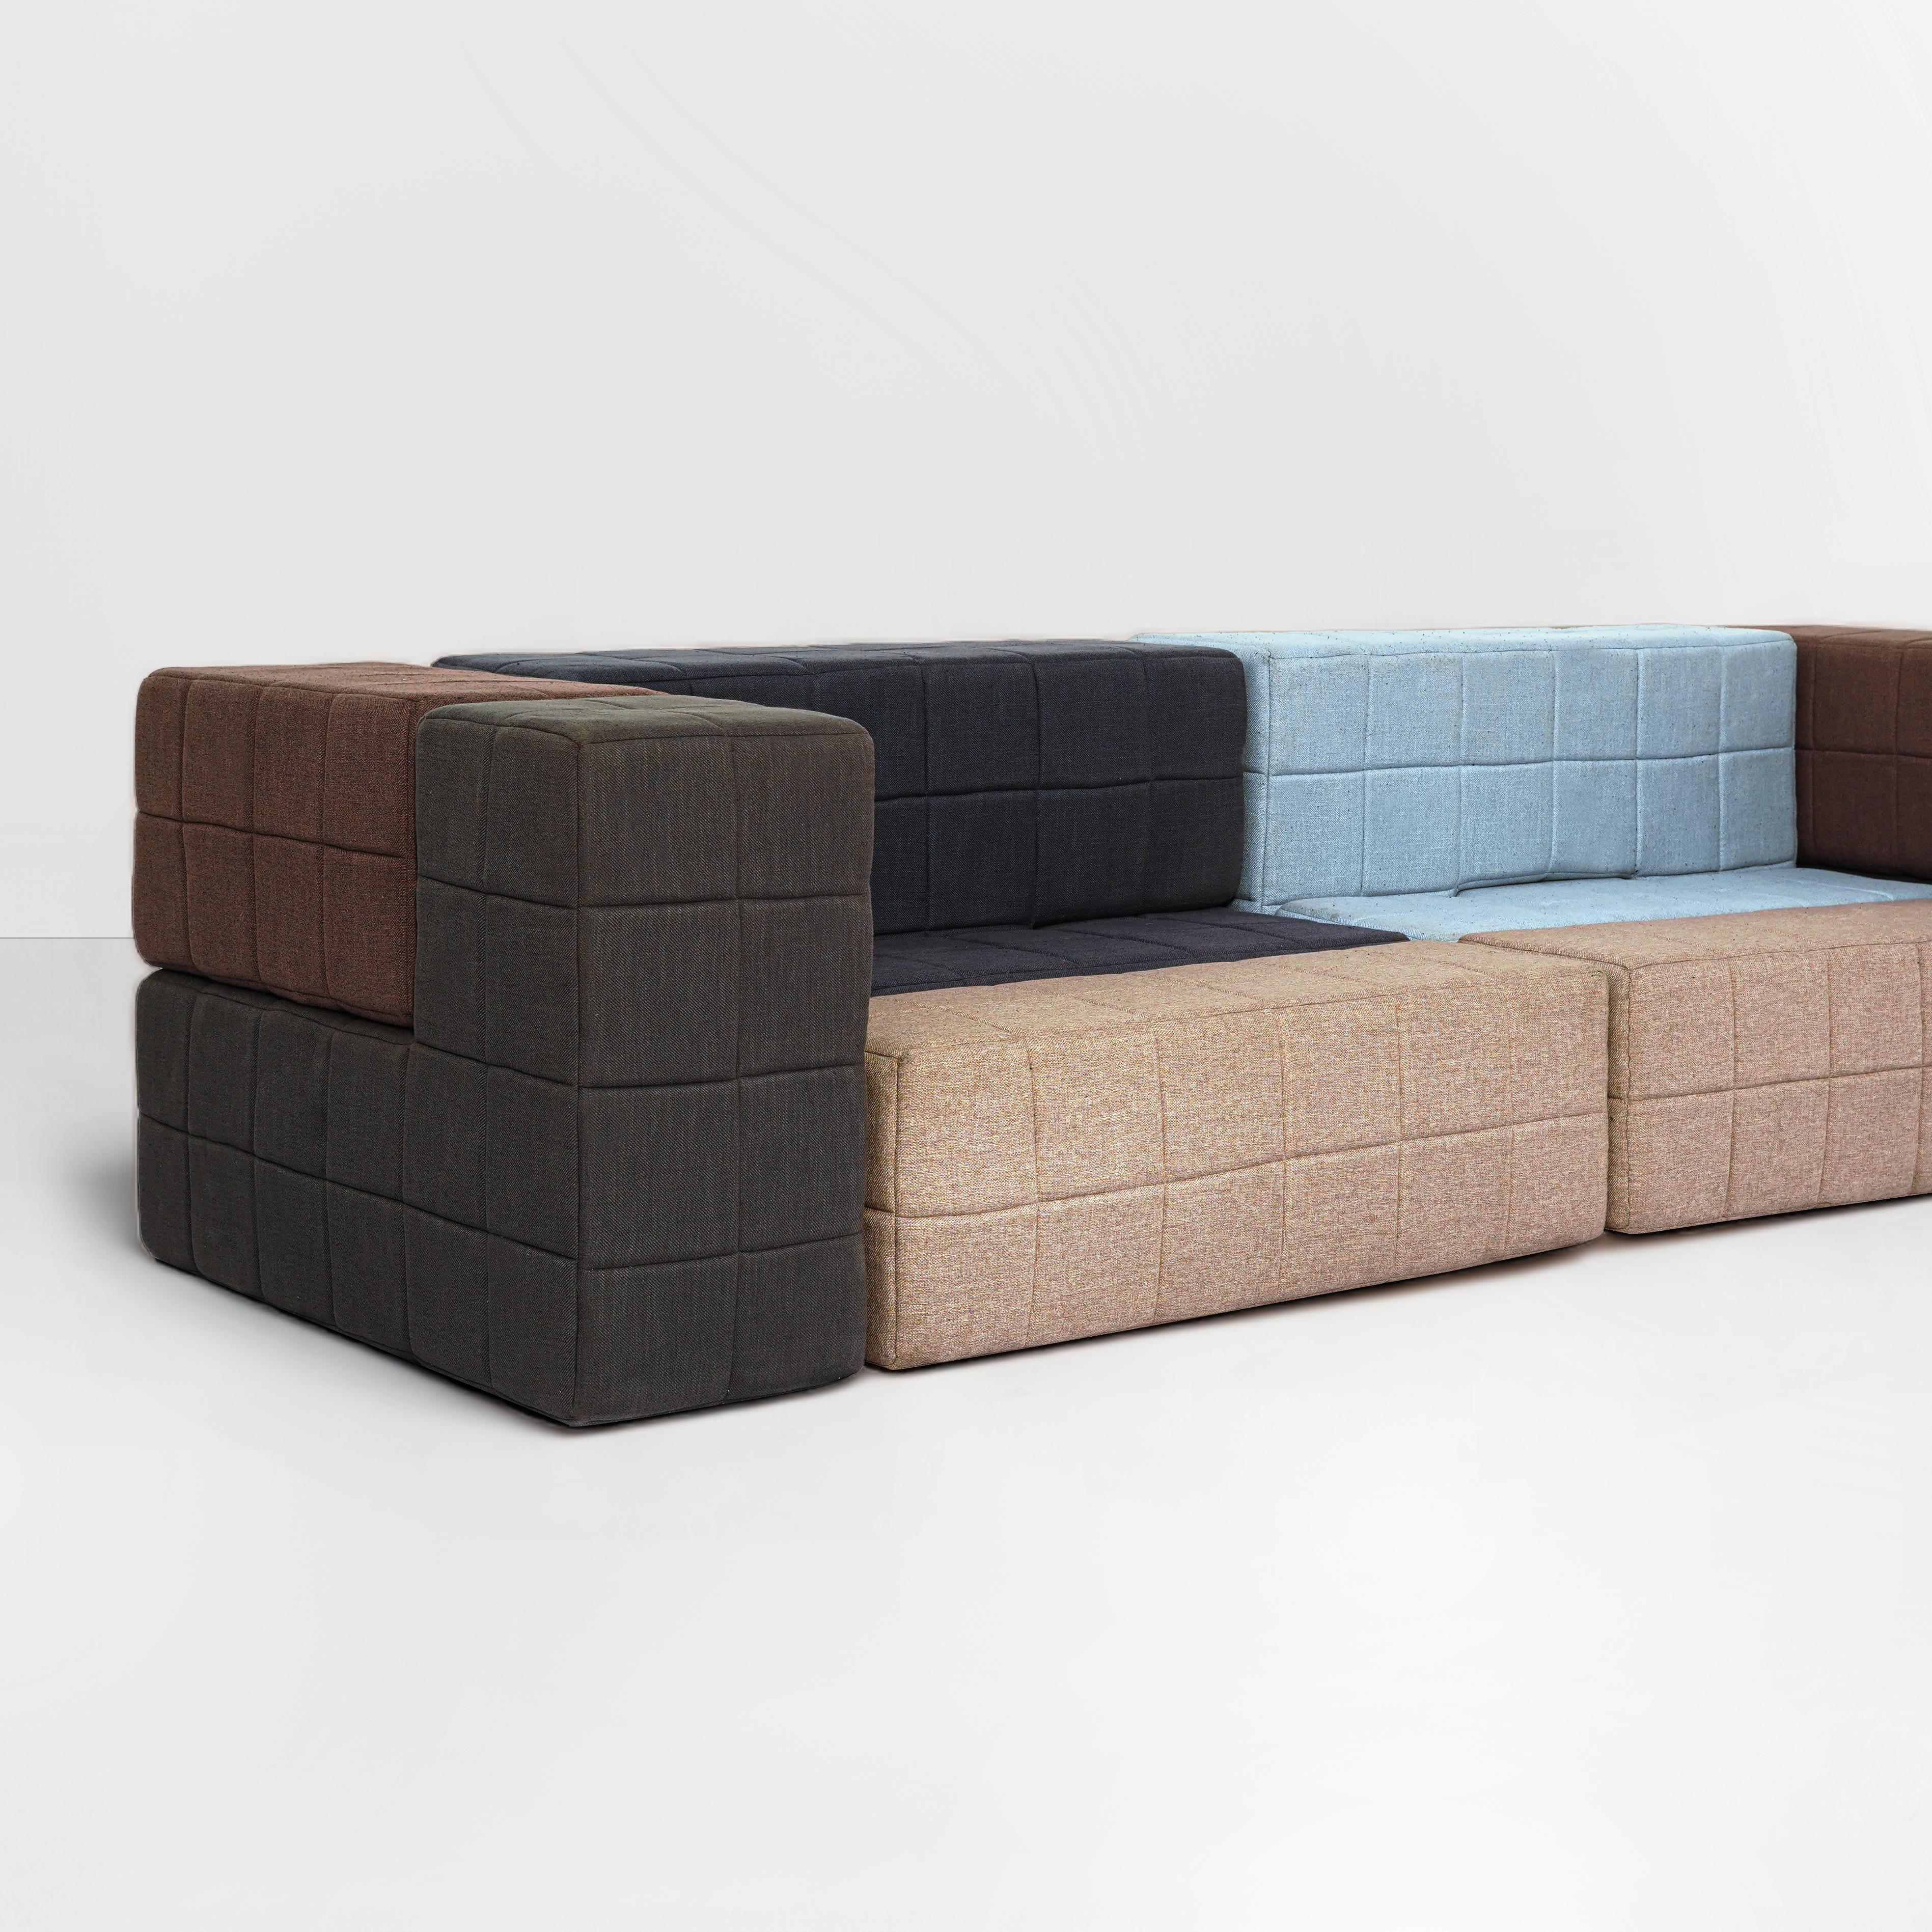 Leather New, Geometric, transitional, bold, art, modern sectional, modular For Sale